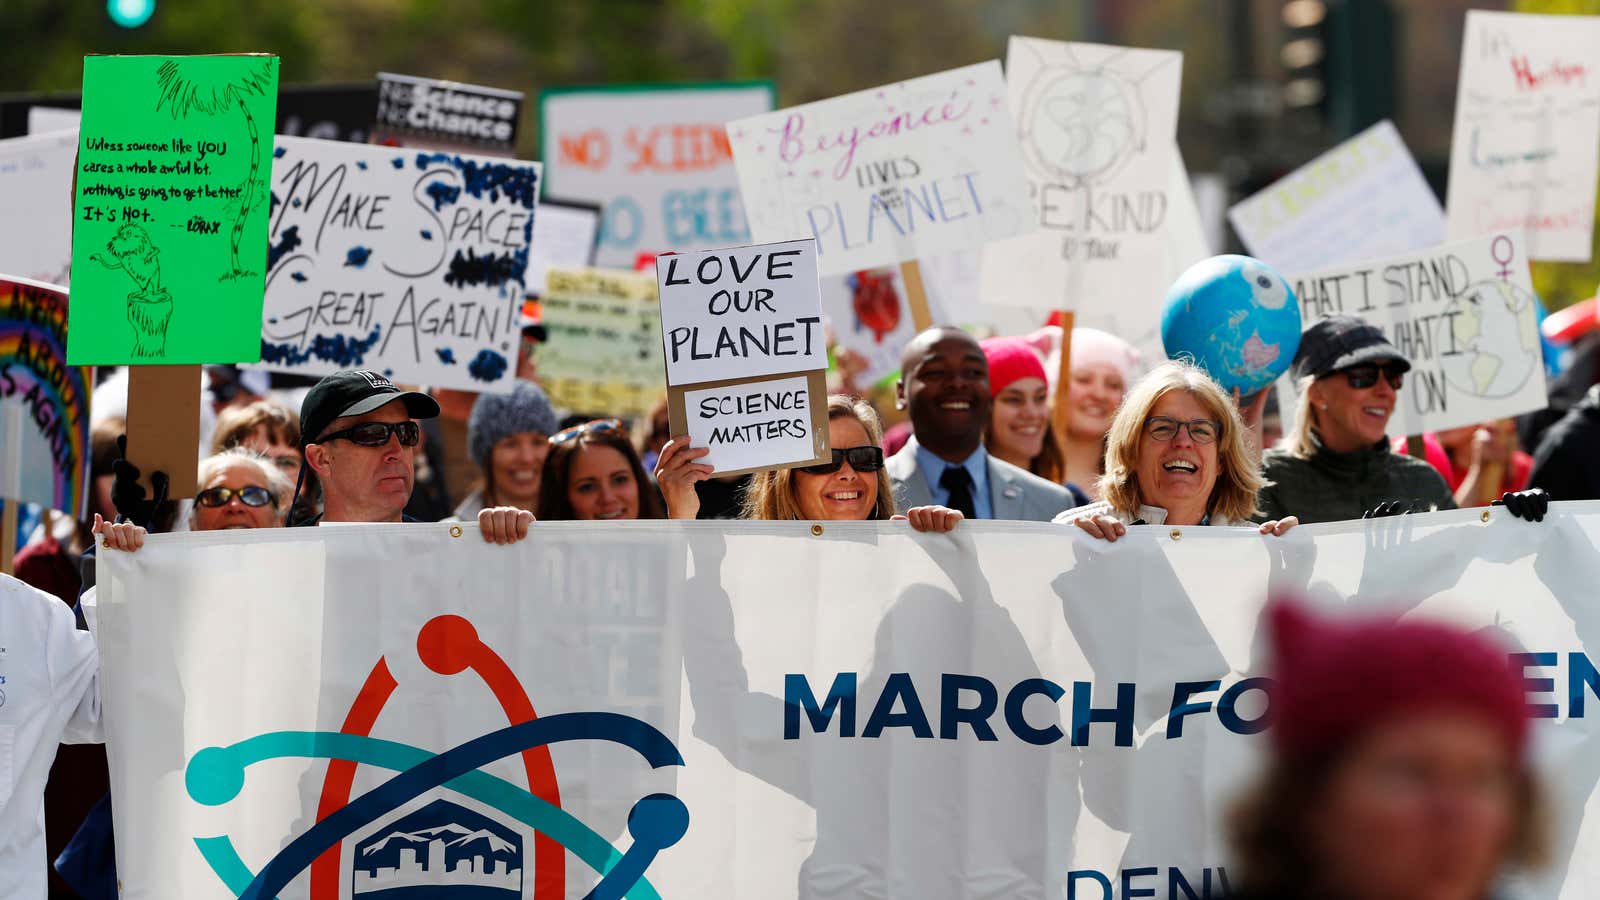 Marching for science.